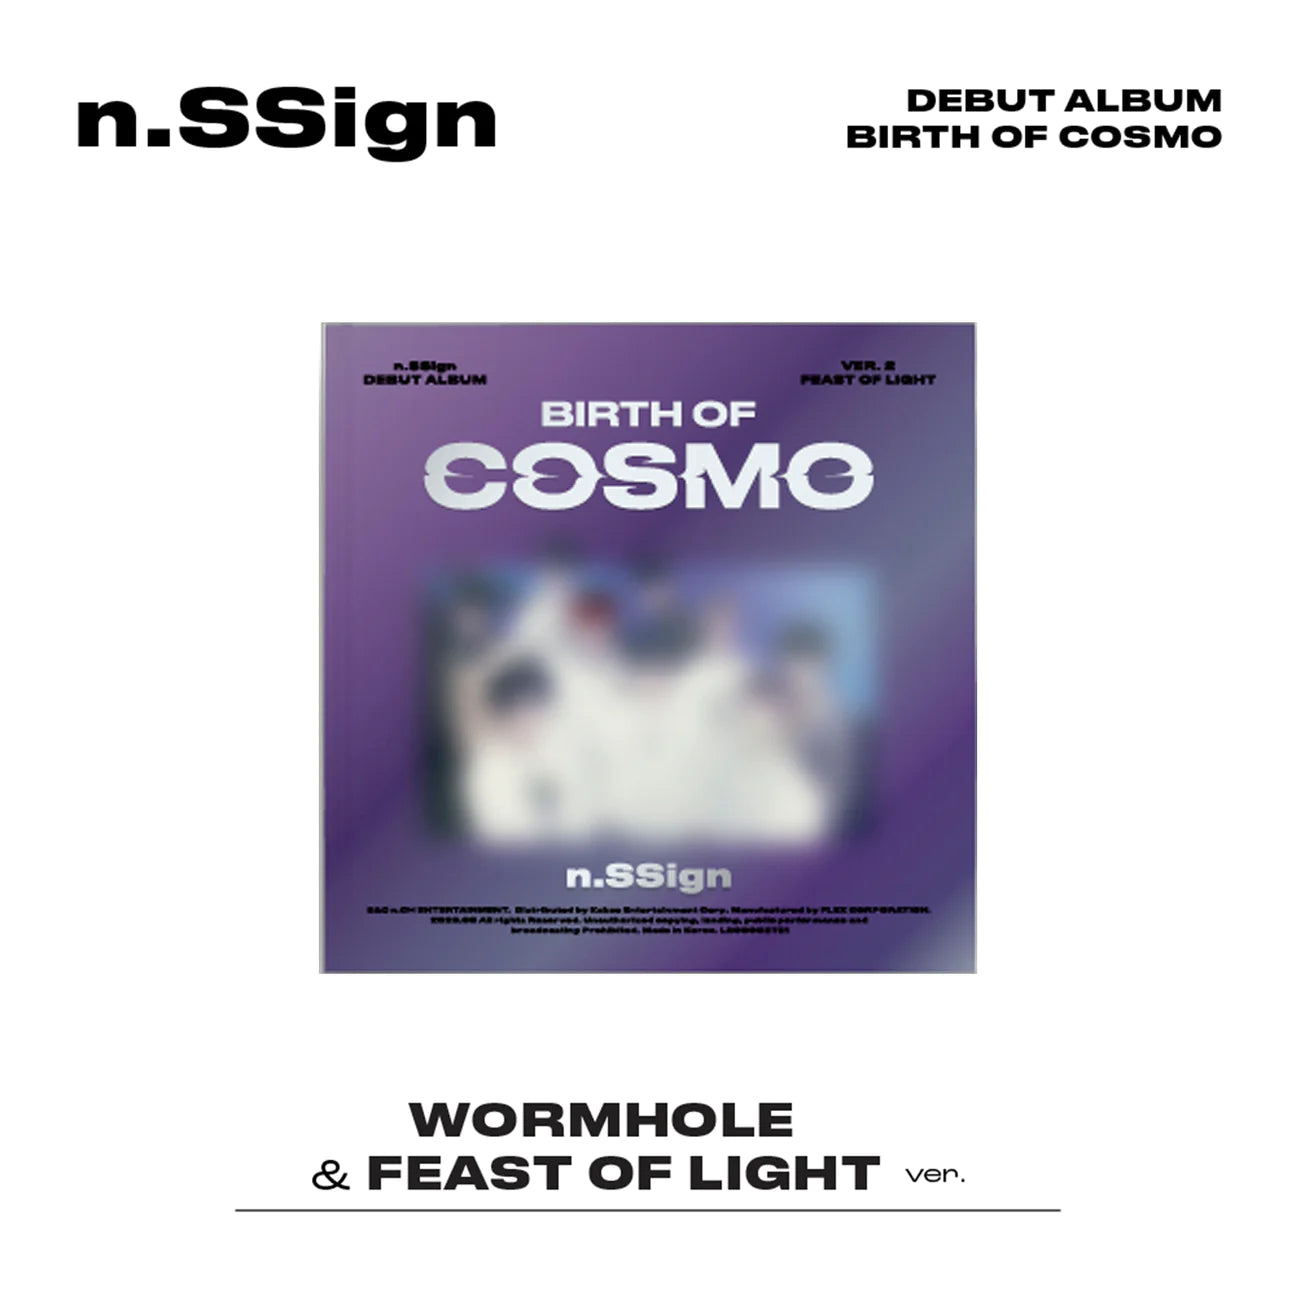 N.SSIGN - DEBUT ALBUM : BIRTH OF COSMO (2 VERSIONS)